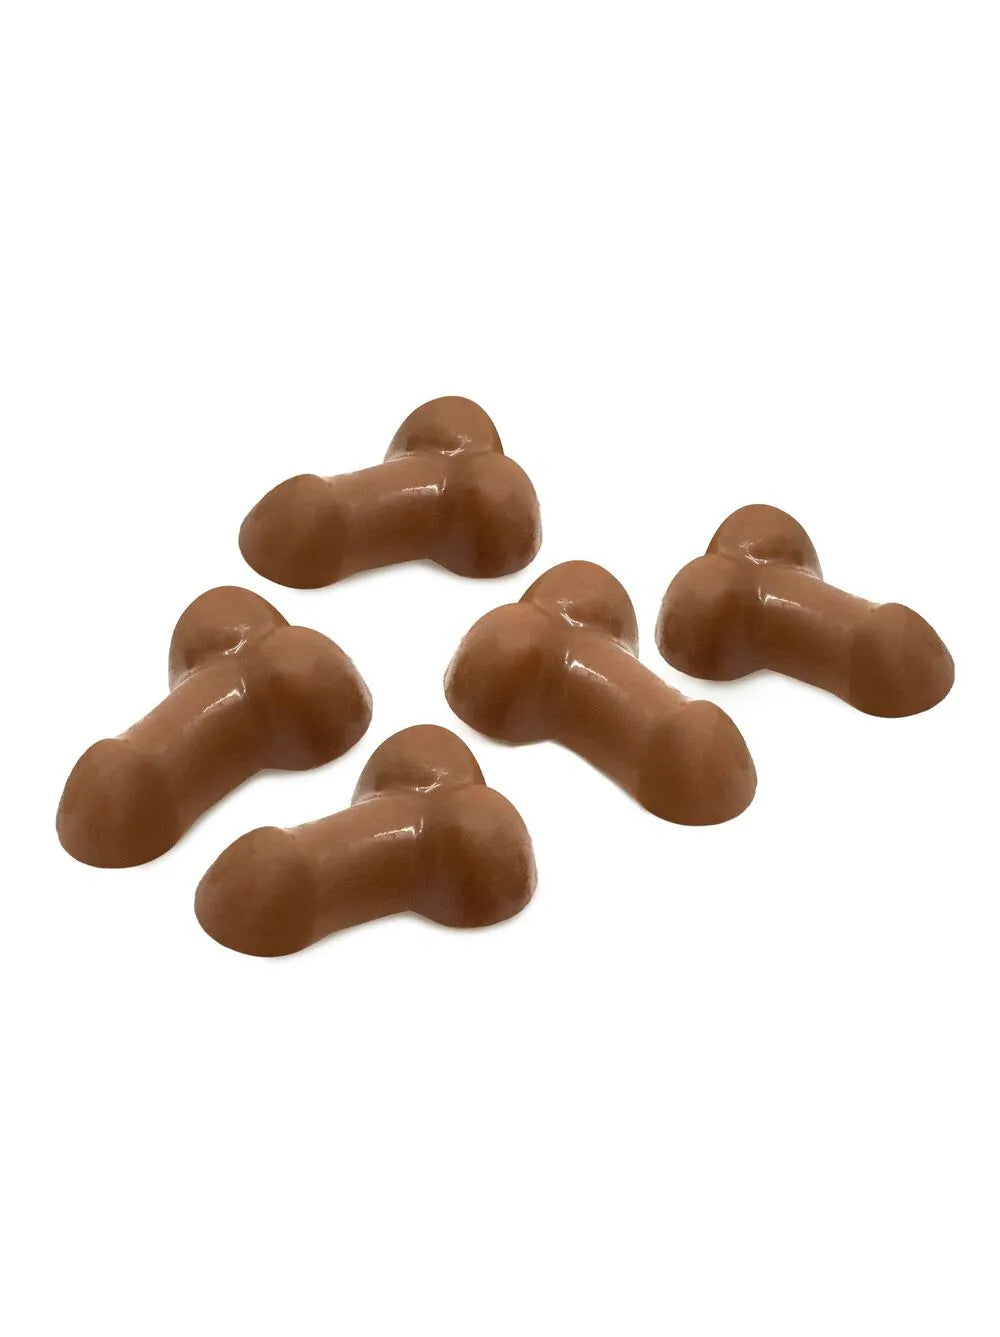 Popping Candy Chocolate Willies